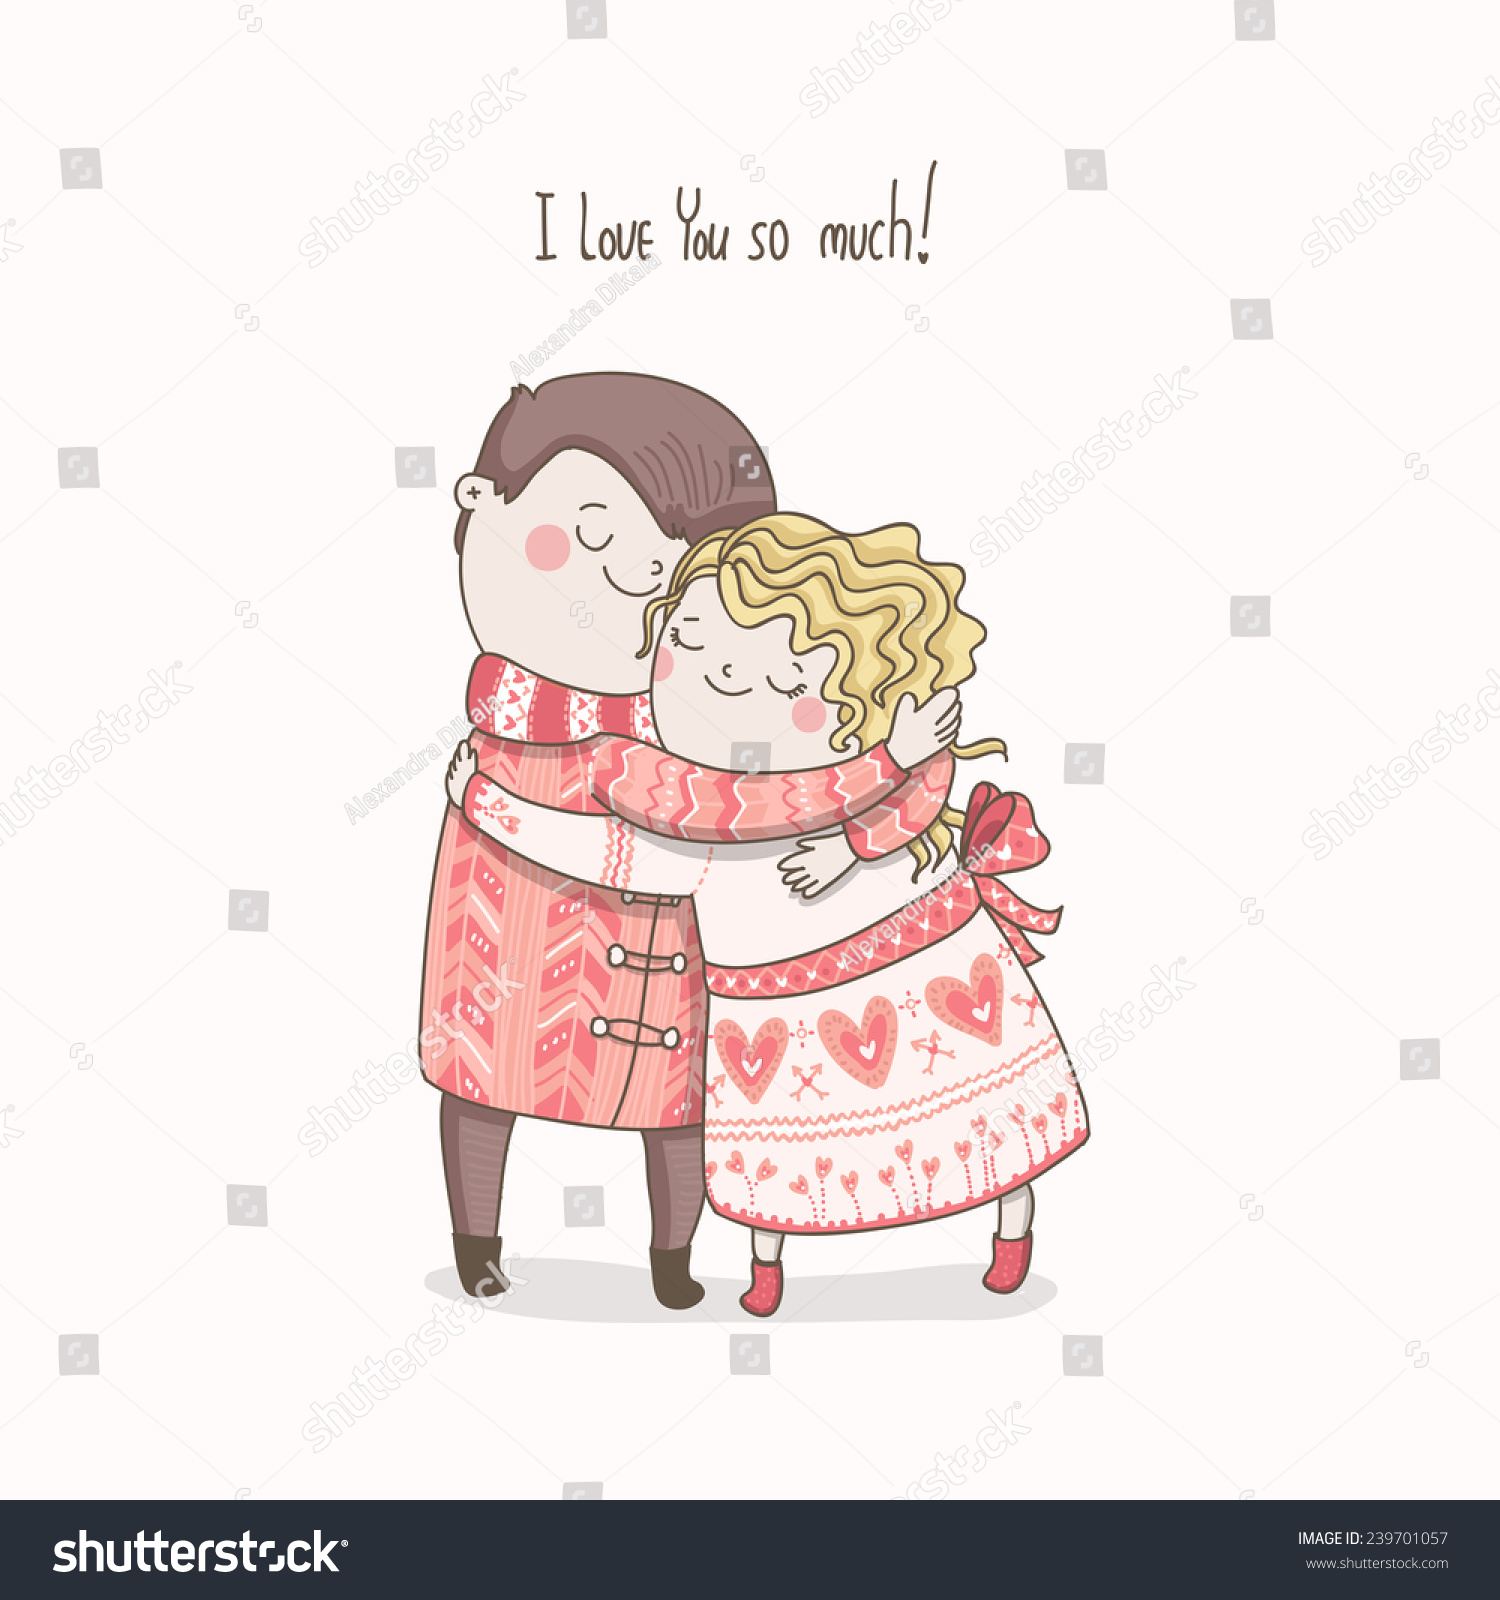 Cute Vector Card Love You Much Stock Vector Royalty Free